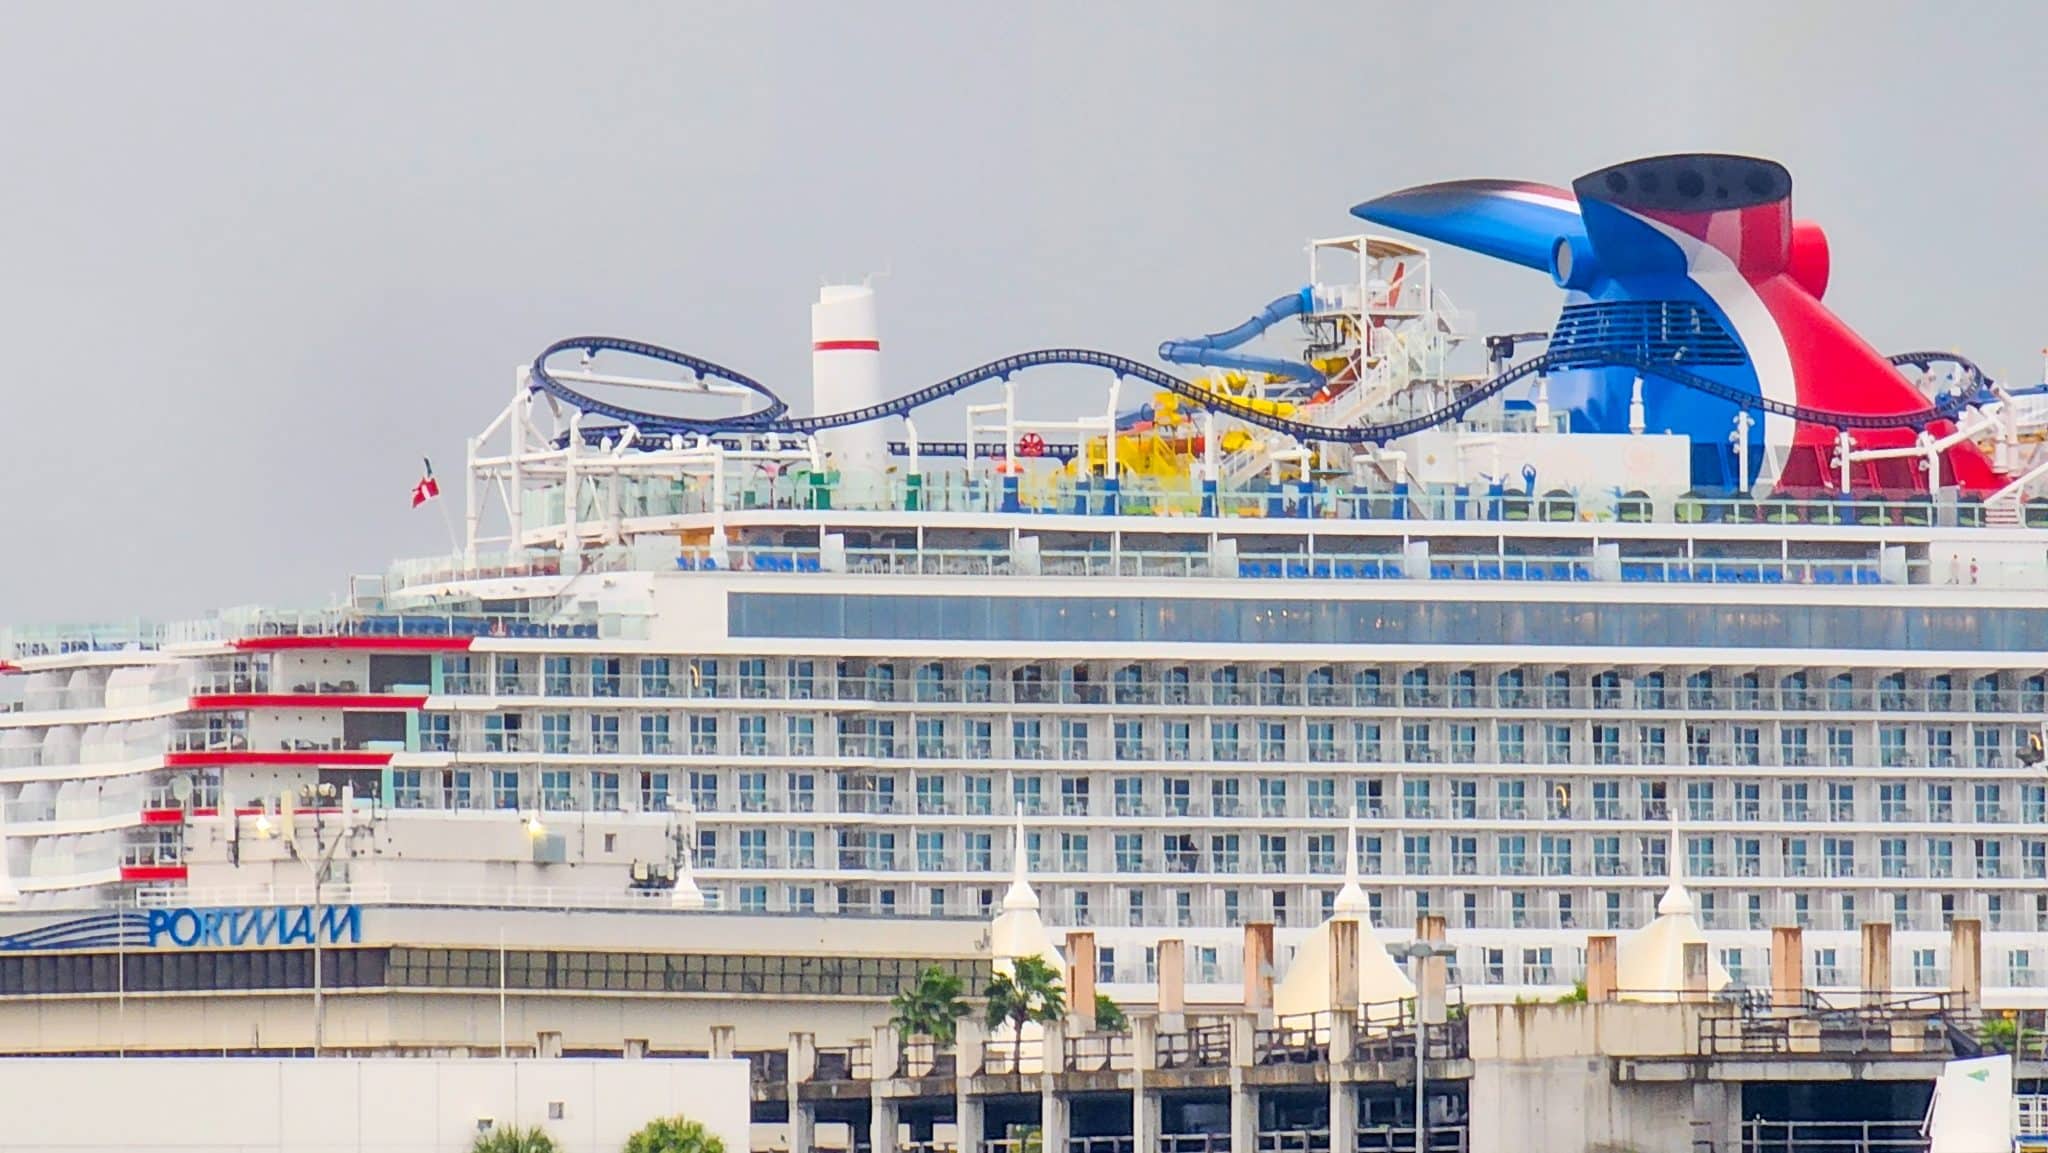 Cruise Ship With a Curler Coaster Arrives in Miami Nice Vacation Bookings